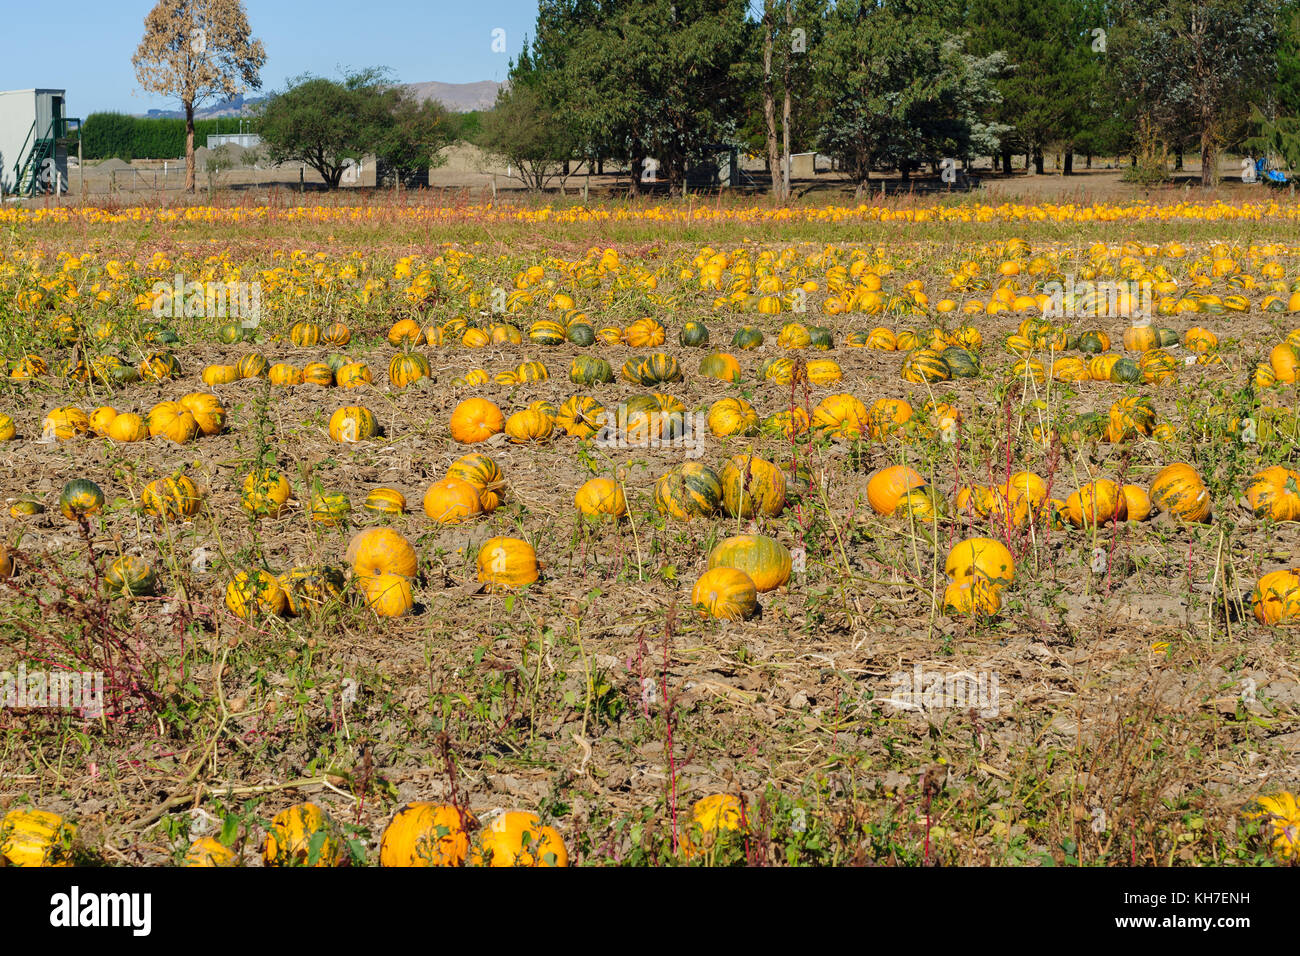 Yellow pumpkins ripening in the summer sun in rural Havelock North Hawkes Bay New Zealand Stock Photo